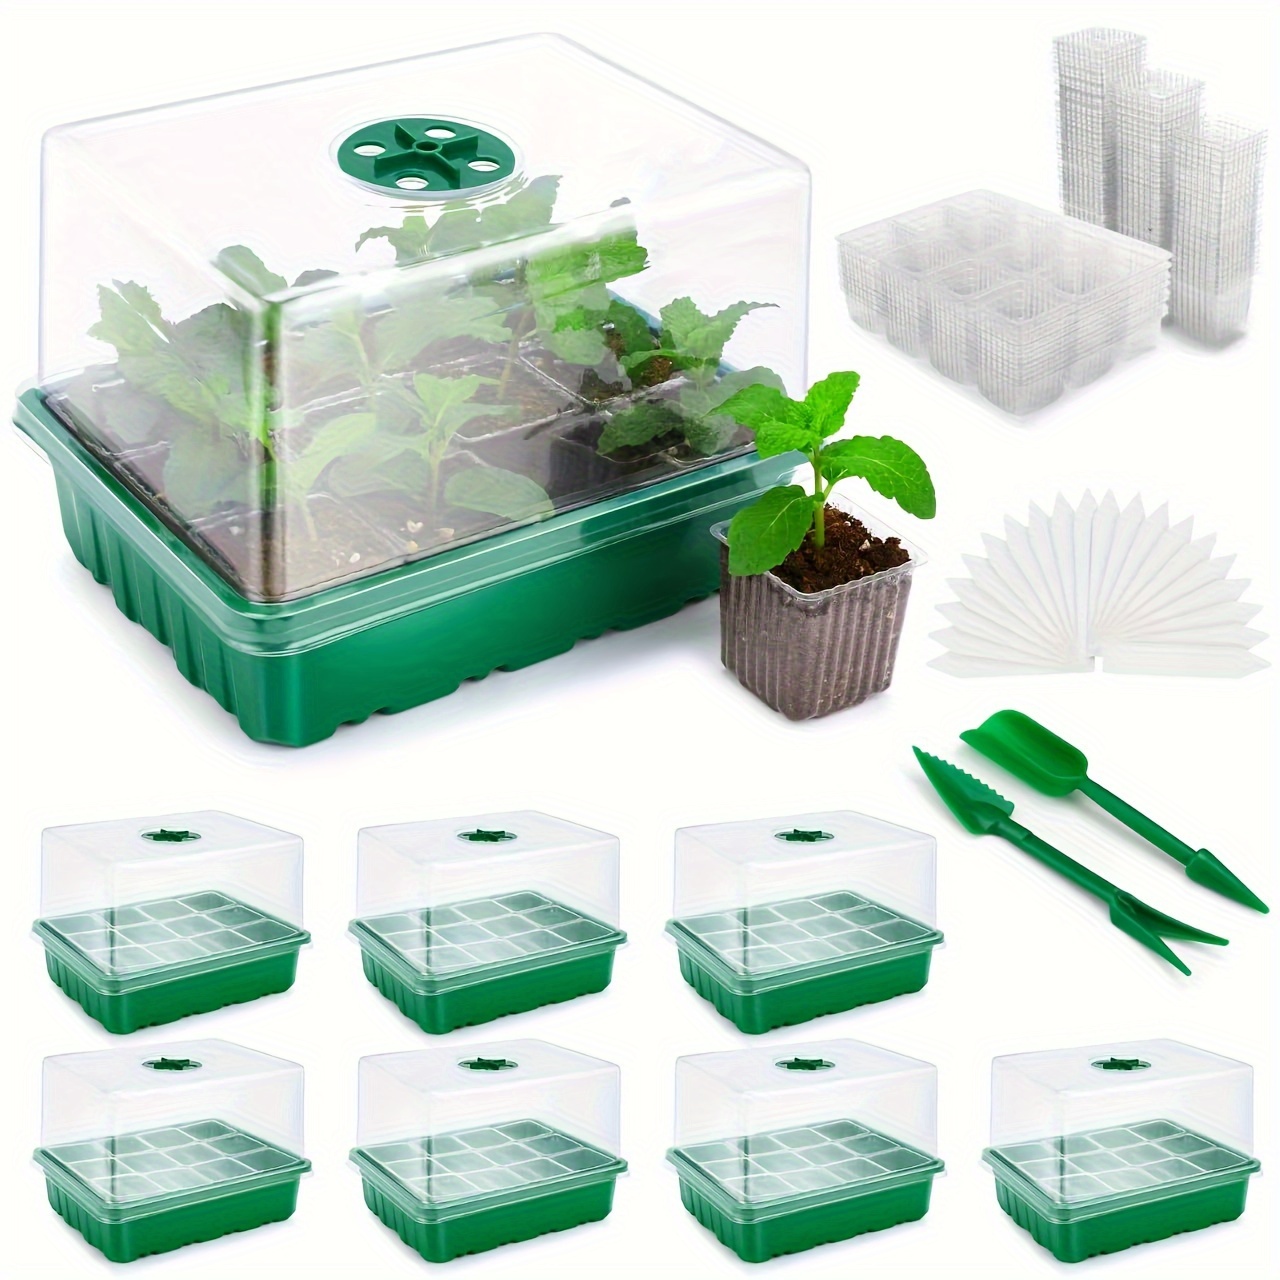 

96 Xl Cells Seed Starter Tray, 8 Packs Seed Starter Kit Large Size & Individual Cells, Seedling Starting Trays With Humidity Dome & High Lid, Germination Kit For Indoor Greenhouse Seed Starter